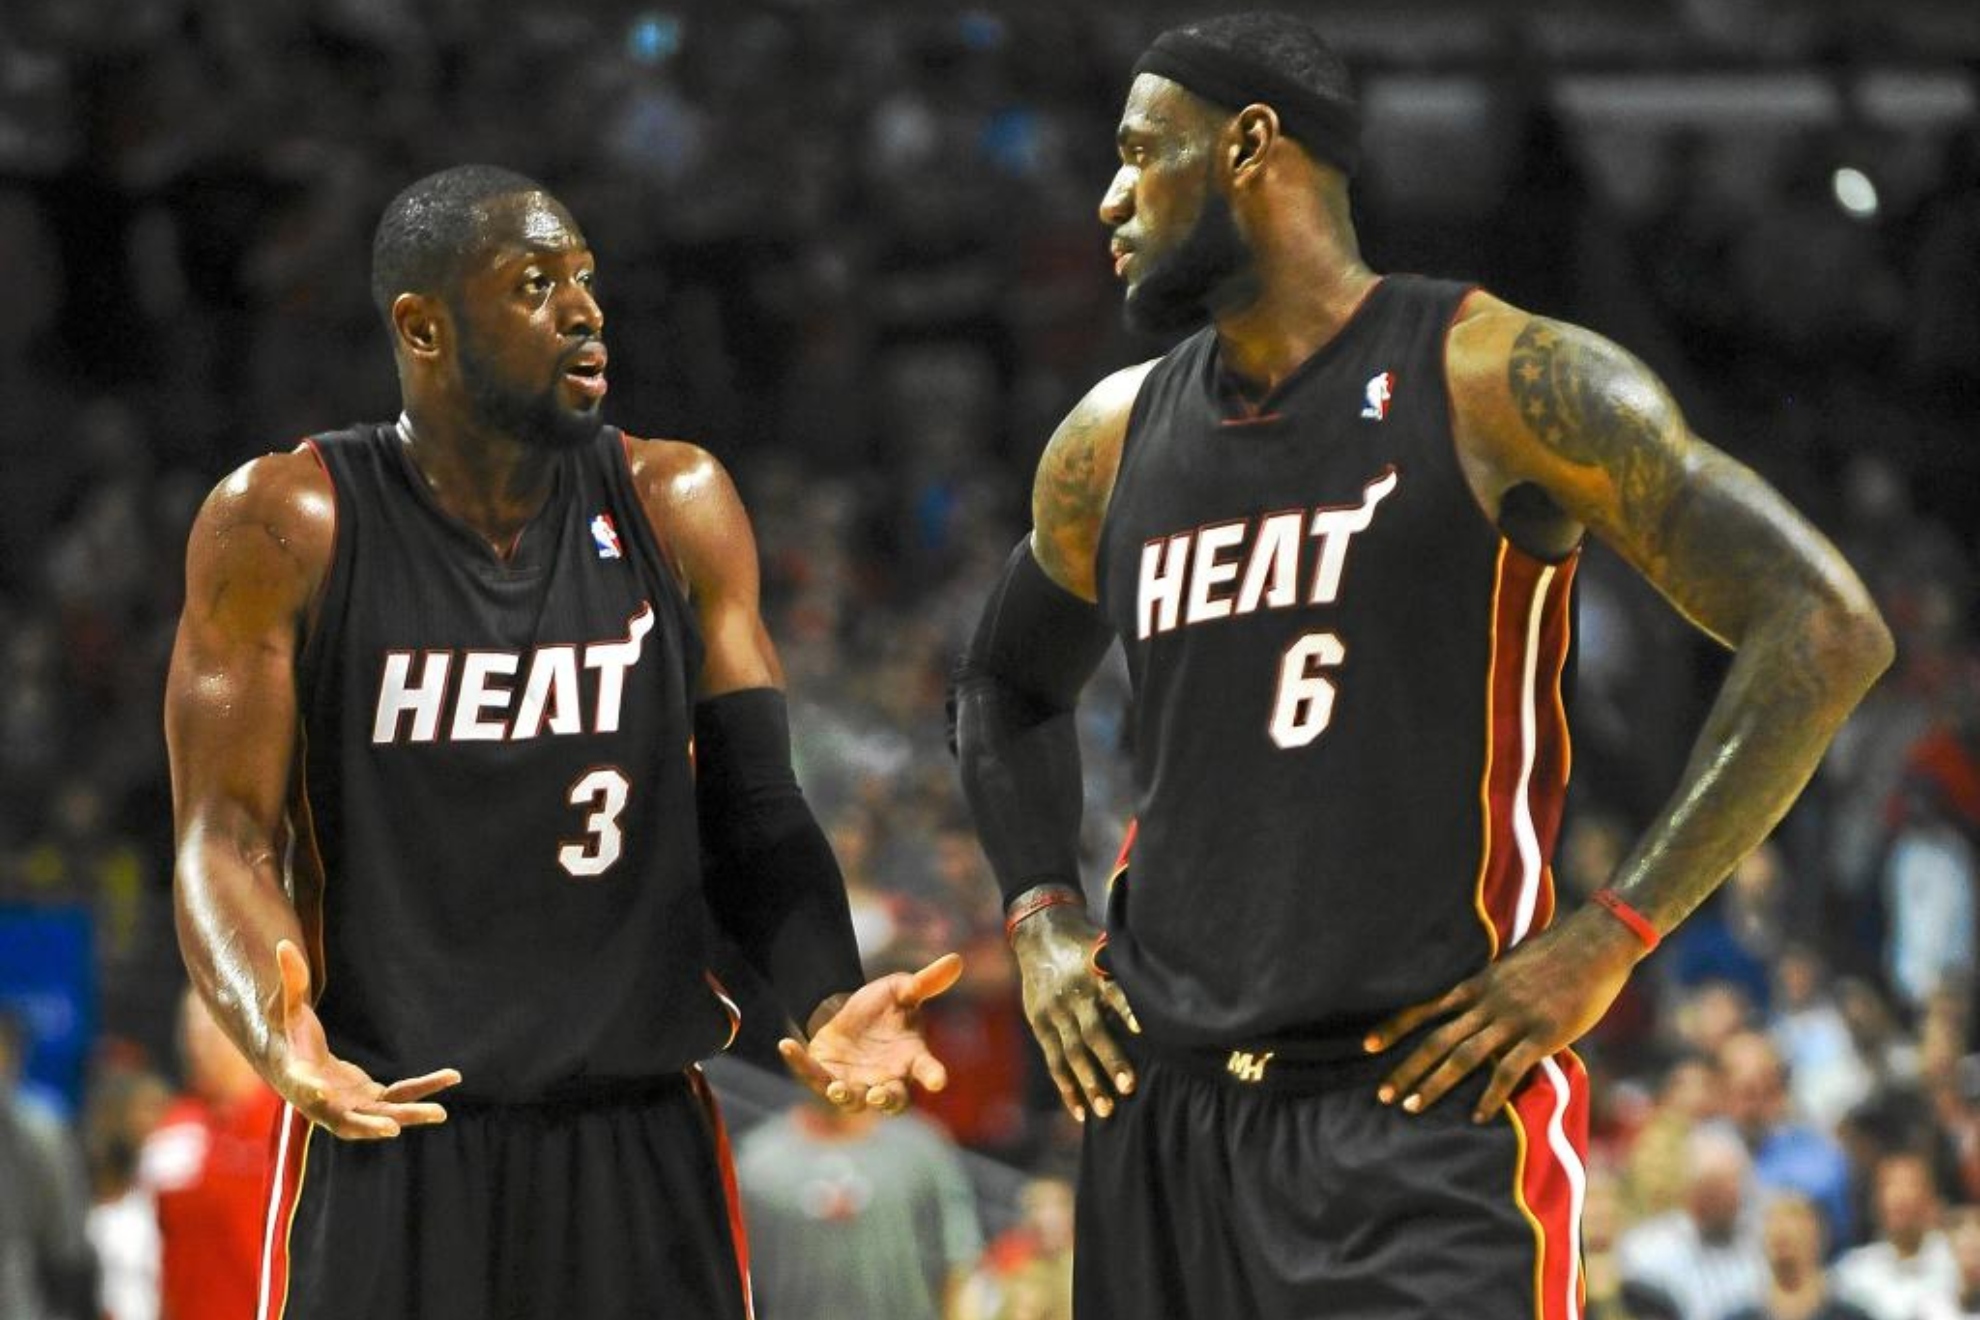 The incredible story of how Wade convinced LeBron to play together in Miami